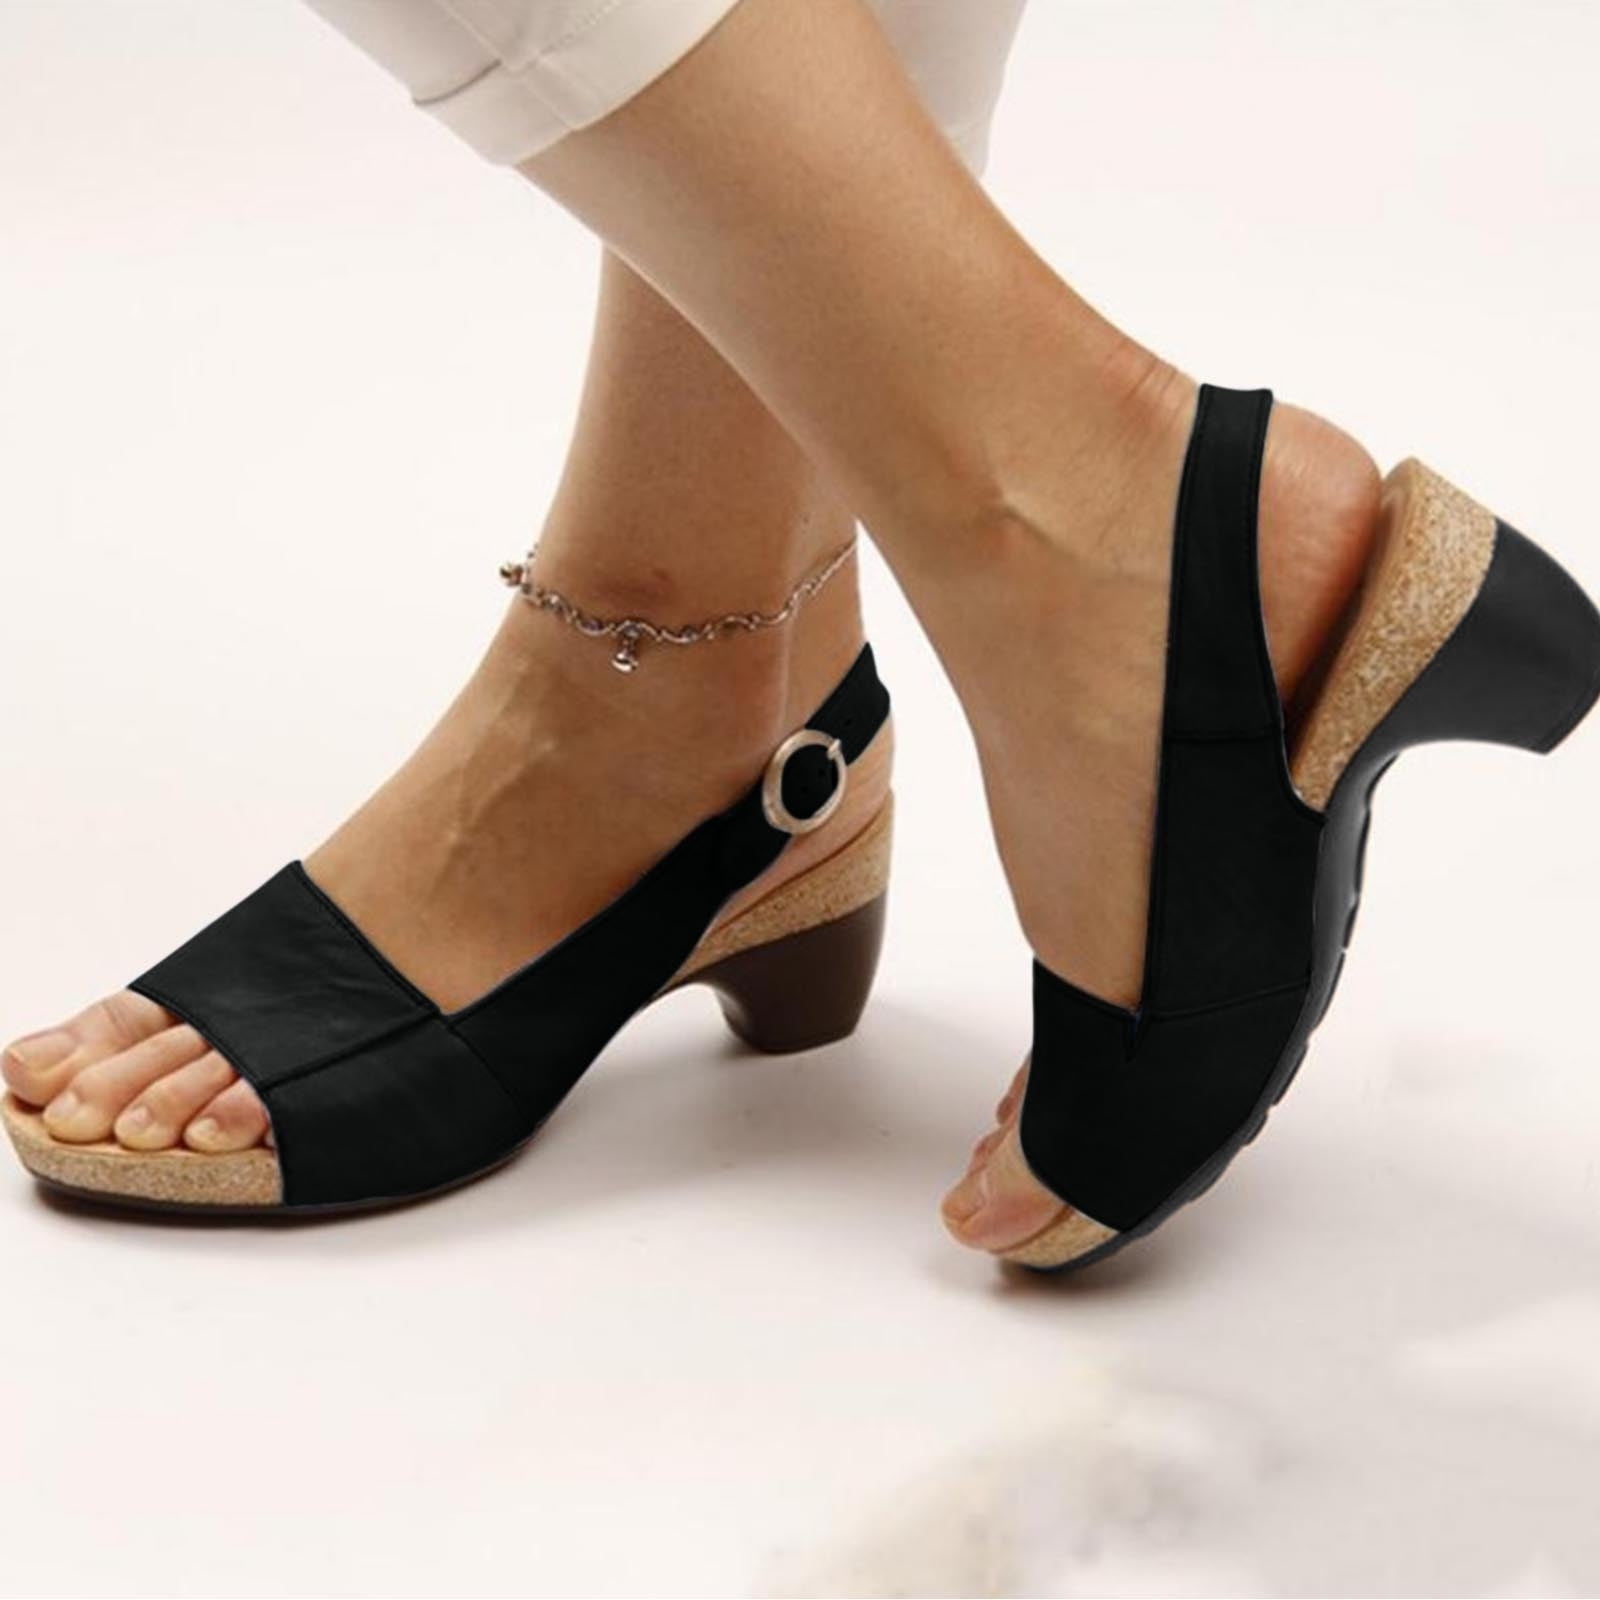 Spring and summer new style thick heel Women's sandals High heel Buckle  Open toe women's shoes brown high 8cm plus size 32-46 - AliExpress